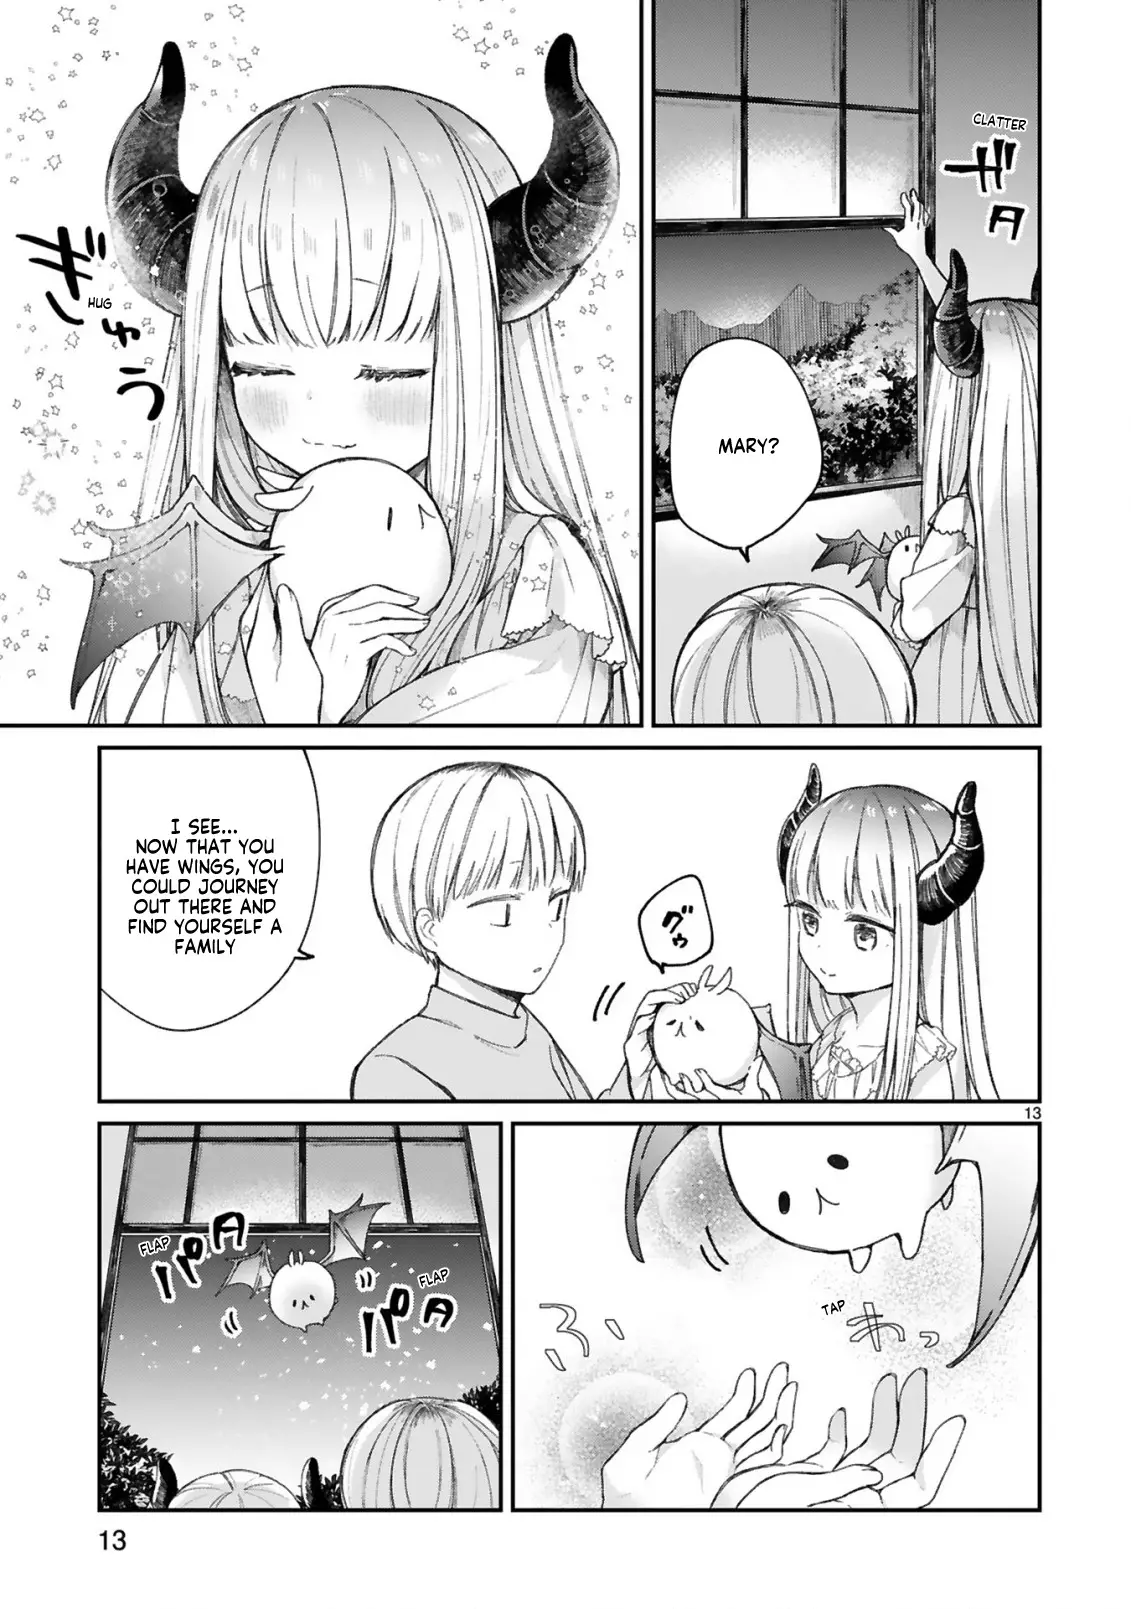 I Was Summoned By The Demon Lord, But I Can't Understand Her Language - 11 page 15